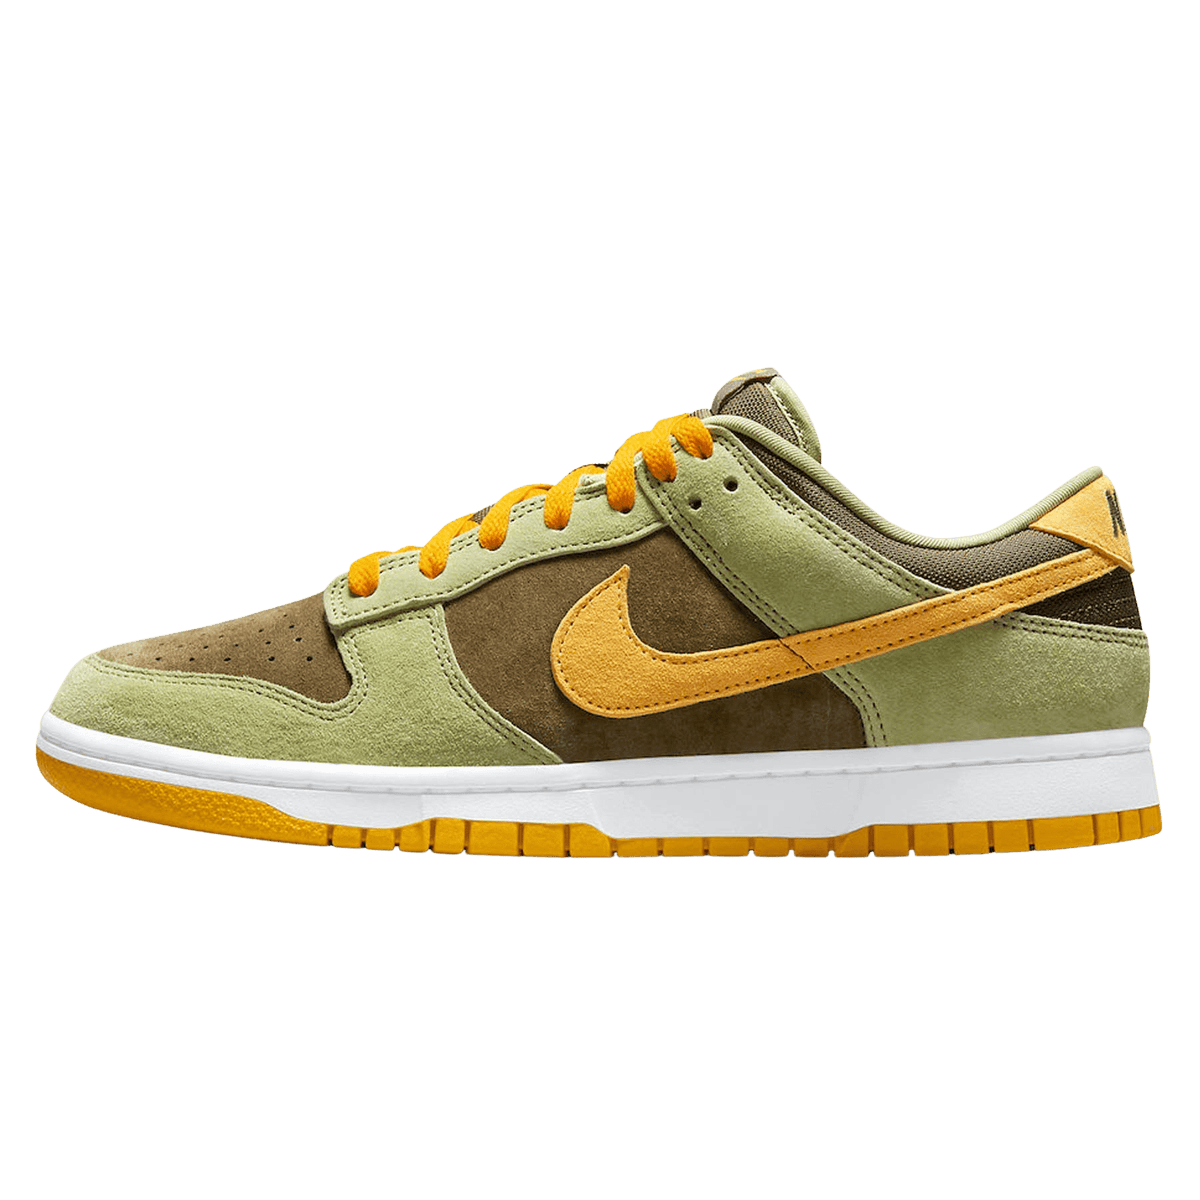 nike dunk low dusty olive pro gold DH5360 300 1